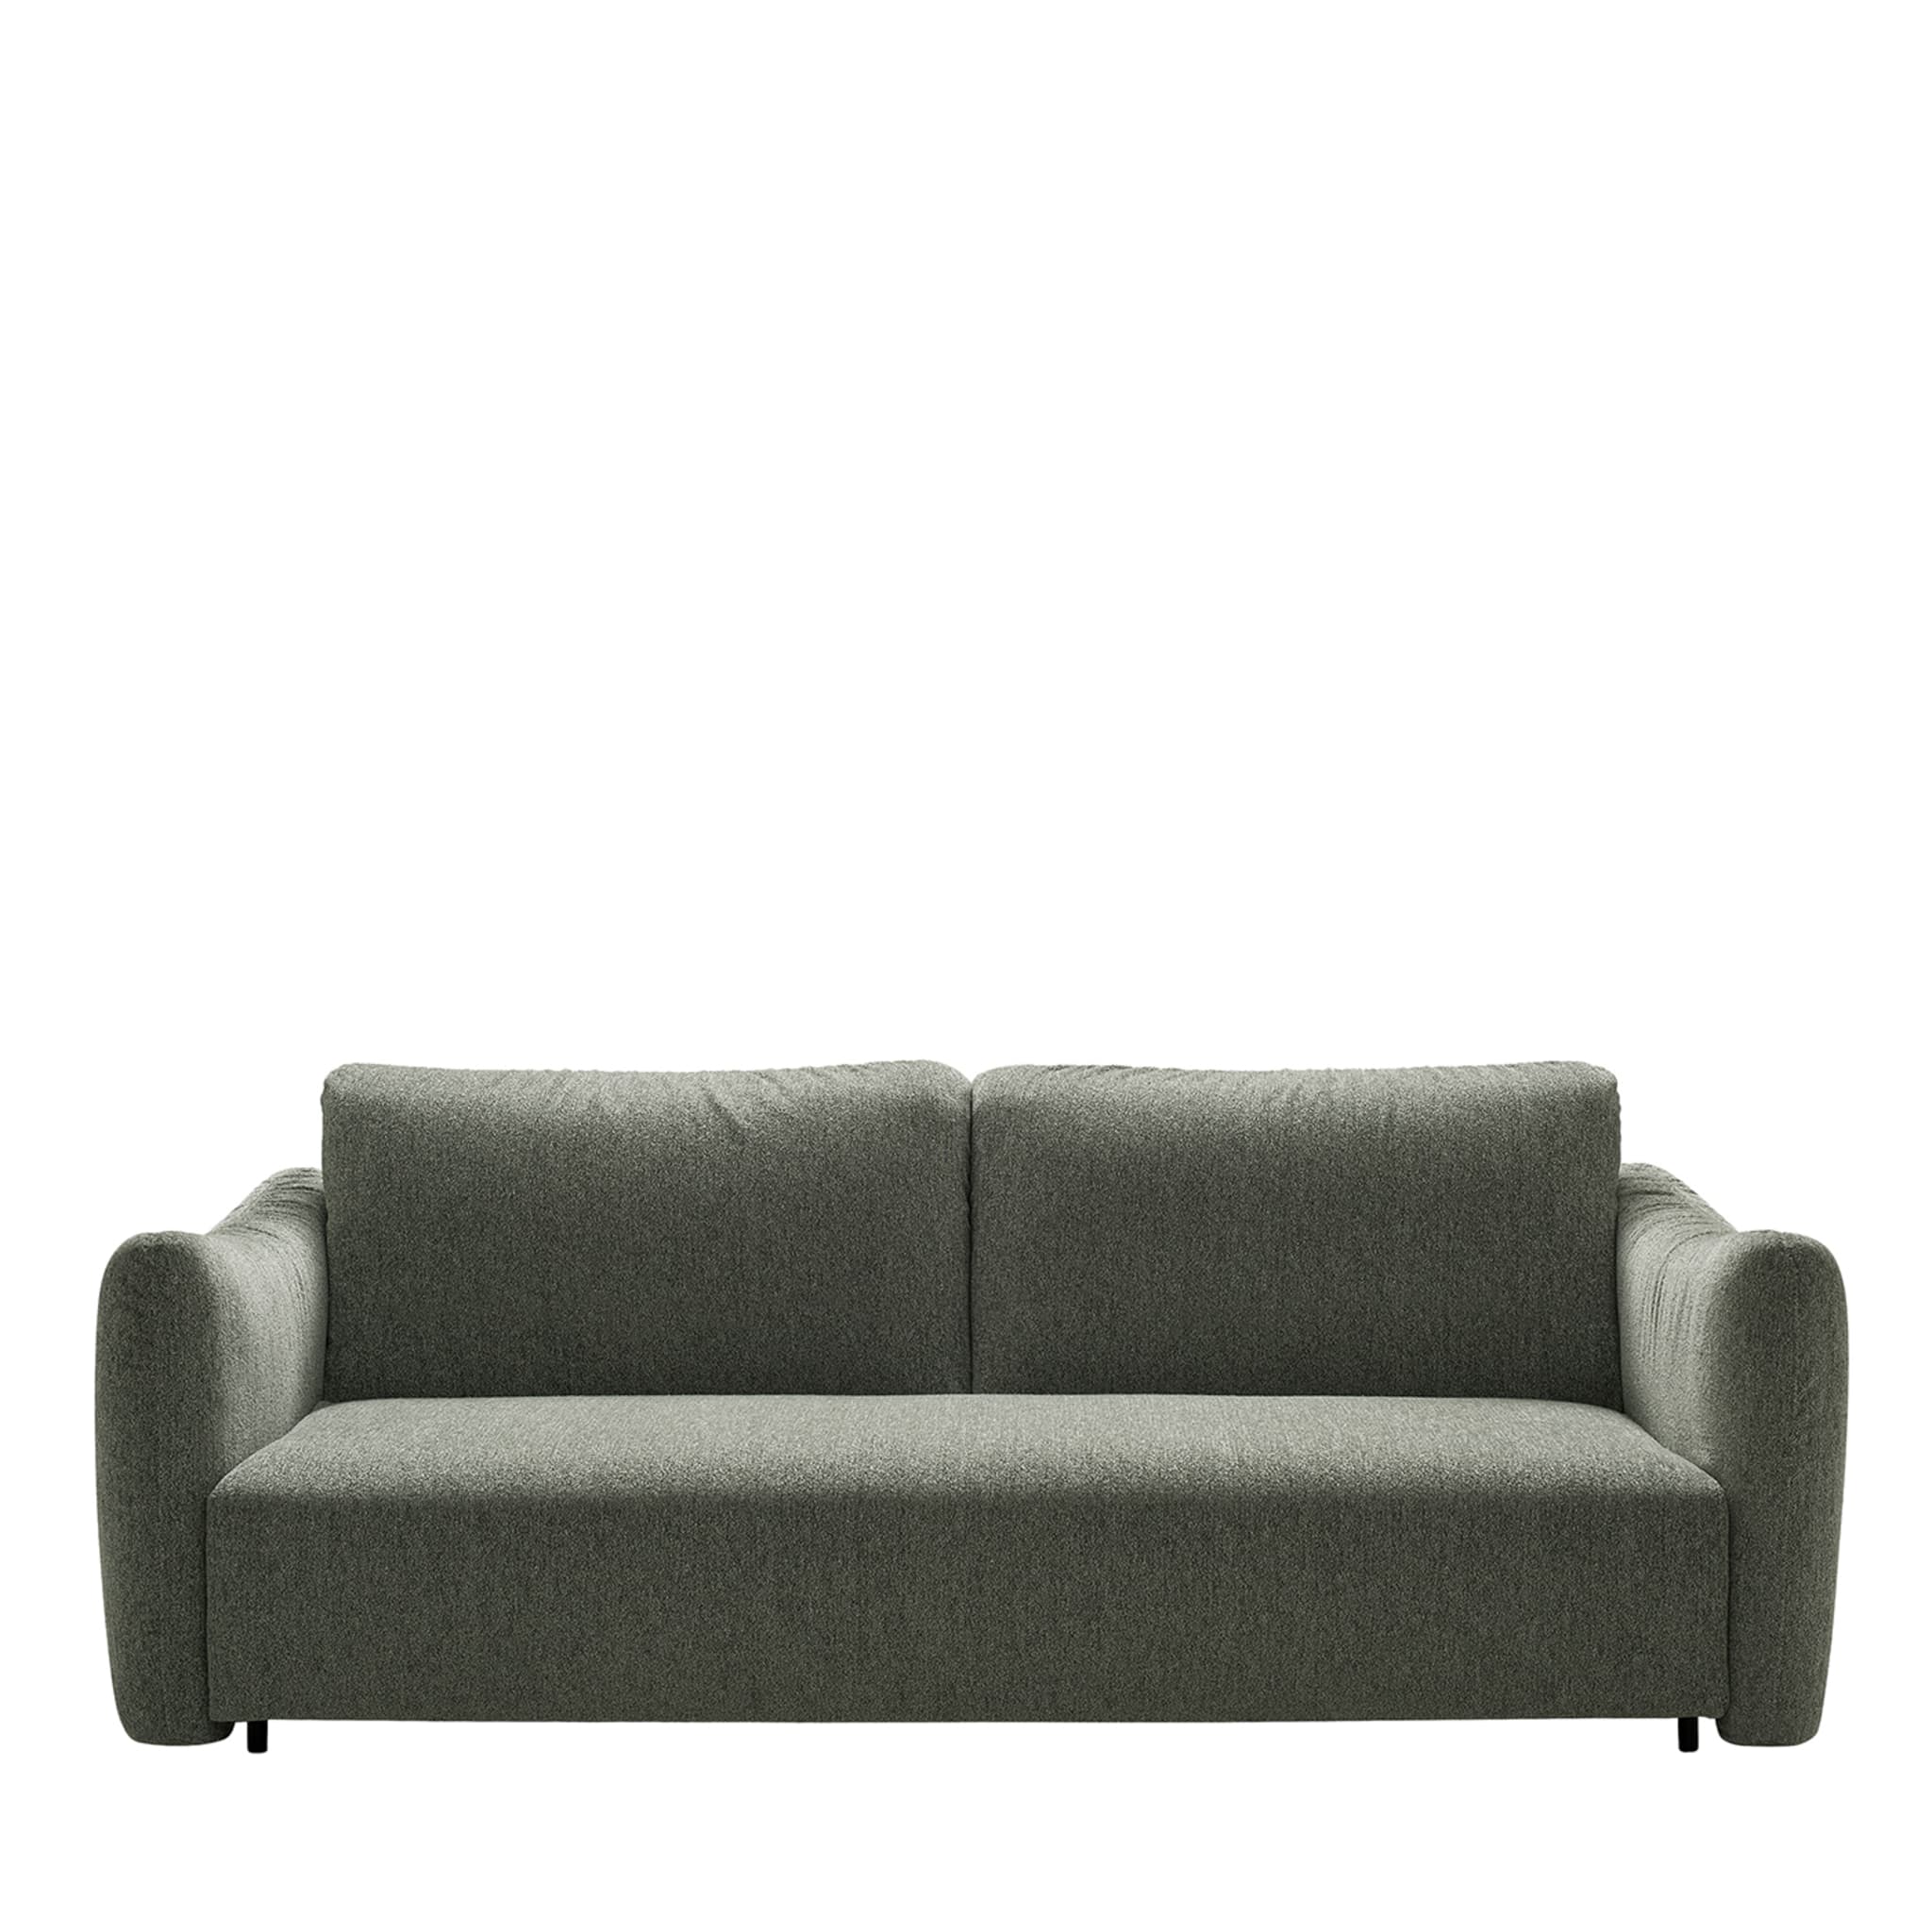 Olivier Green Sofa Bed - Main view